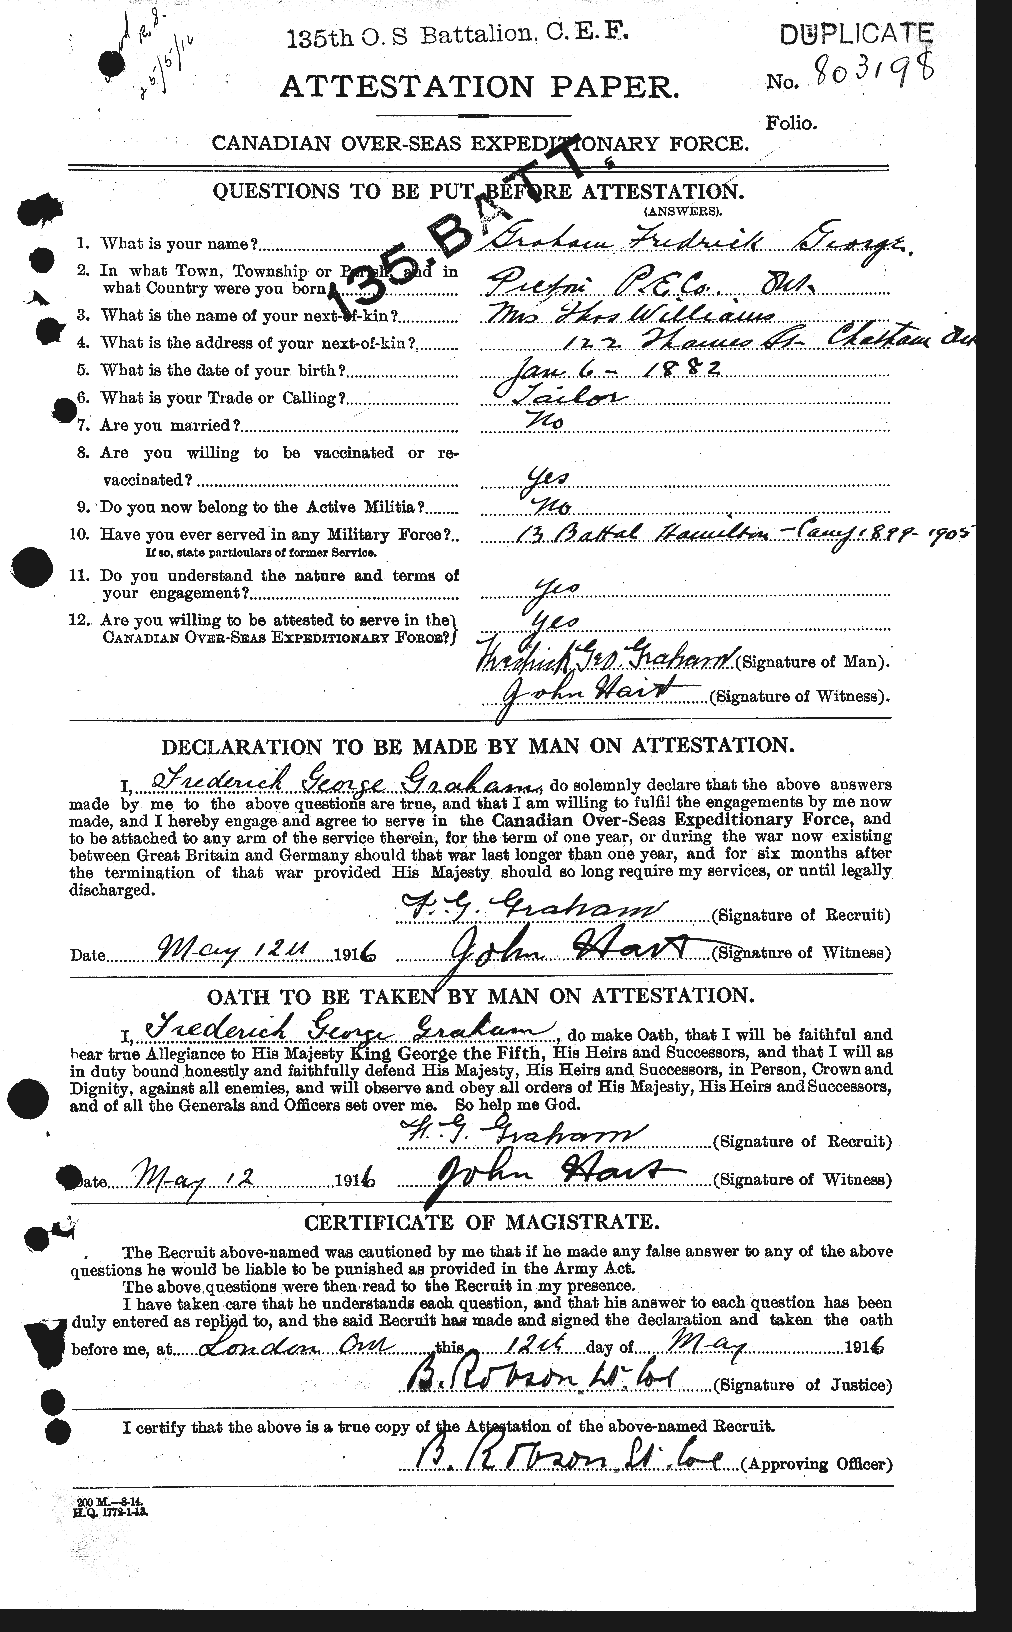 Personnel Records of the First World War - CEF 357612a